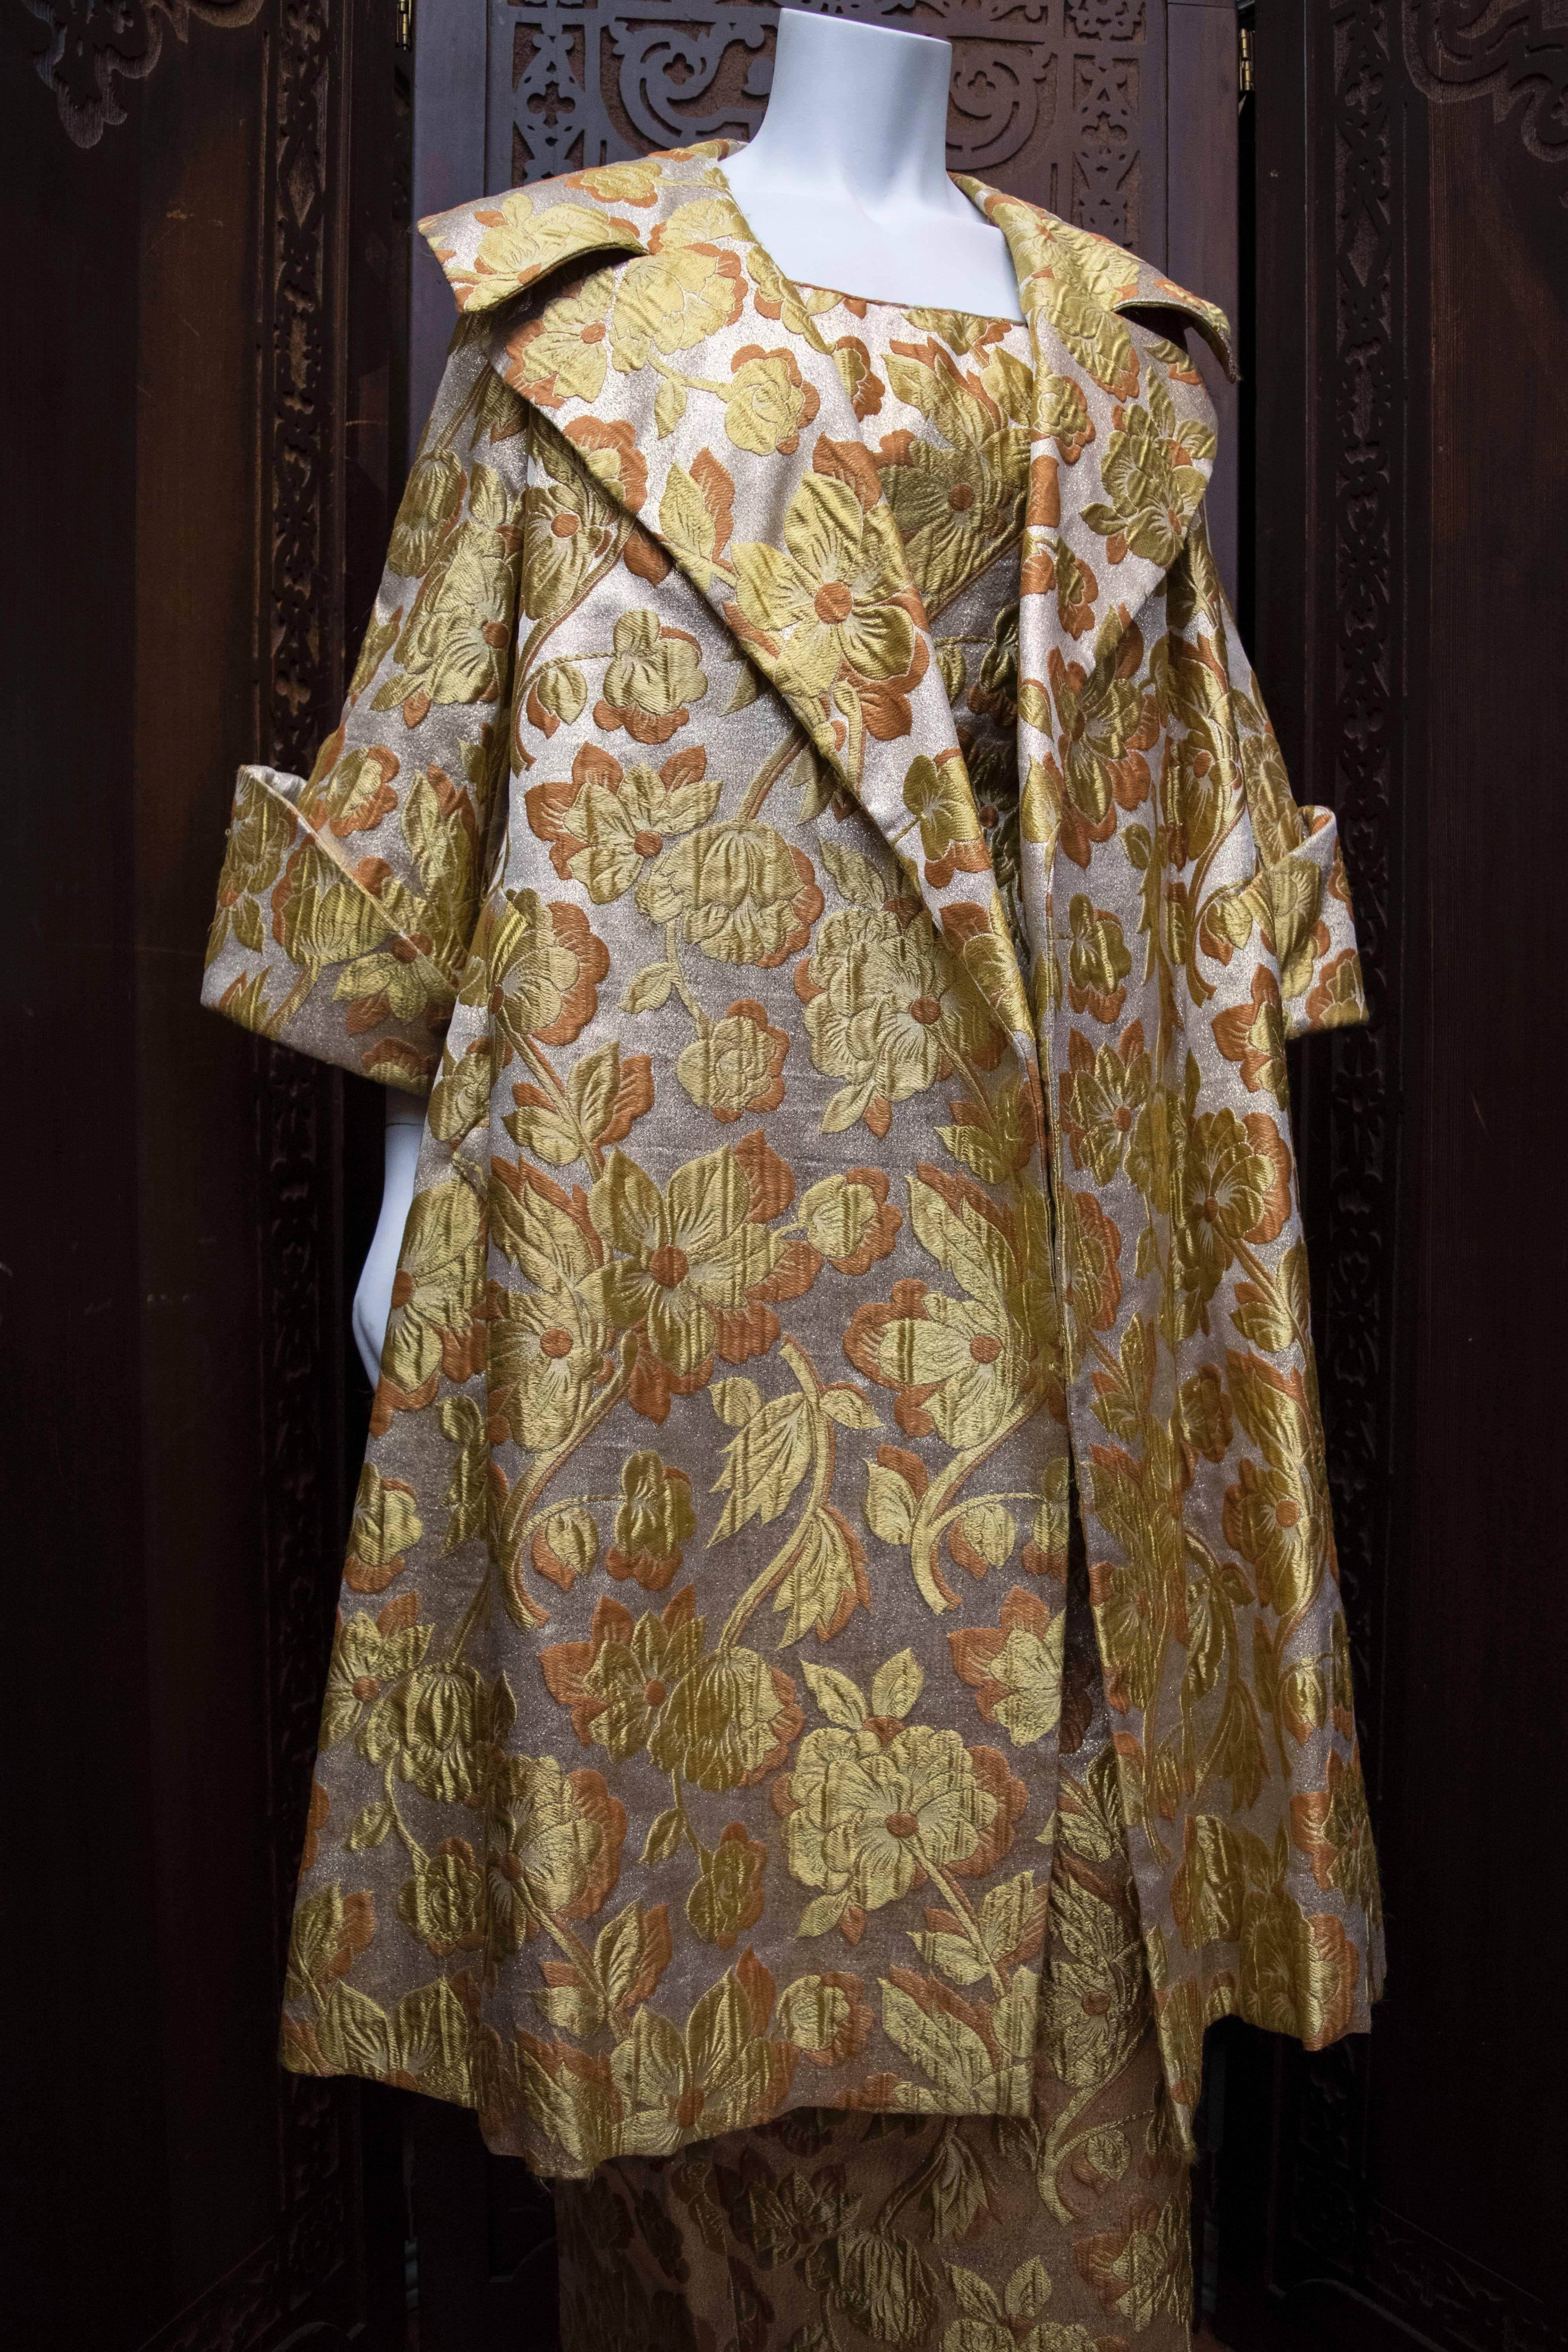 Mr Blackwell 1960s Gold Brocade Evening Dress and Coat.

Incredible Mr Blackwell circa 1960s evening dress and coat! Shimmery lamé brocade in a floral motif! Nice wide-cut sleeves and lapels. Excellent feel and weight to the fabric, lined in